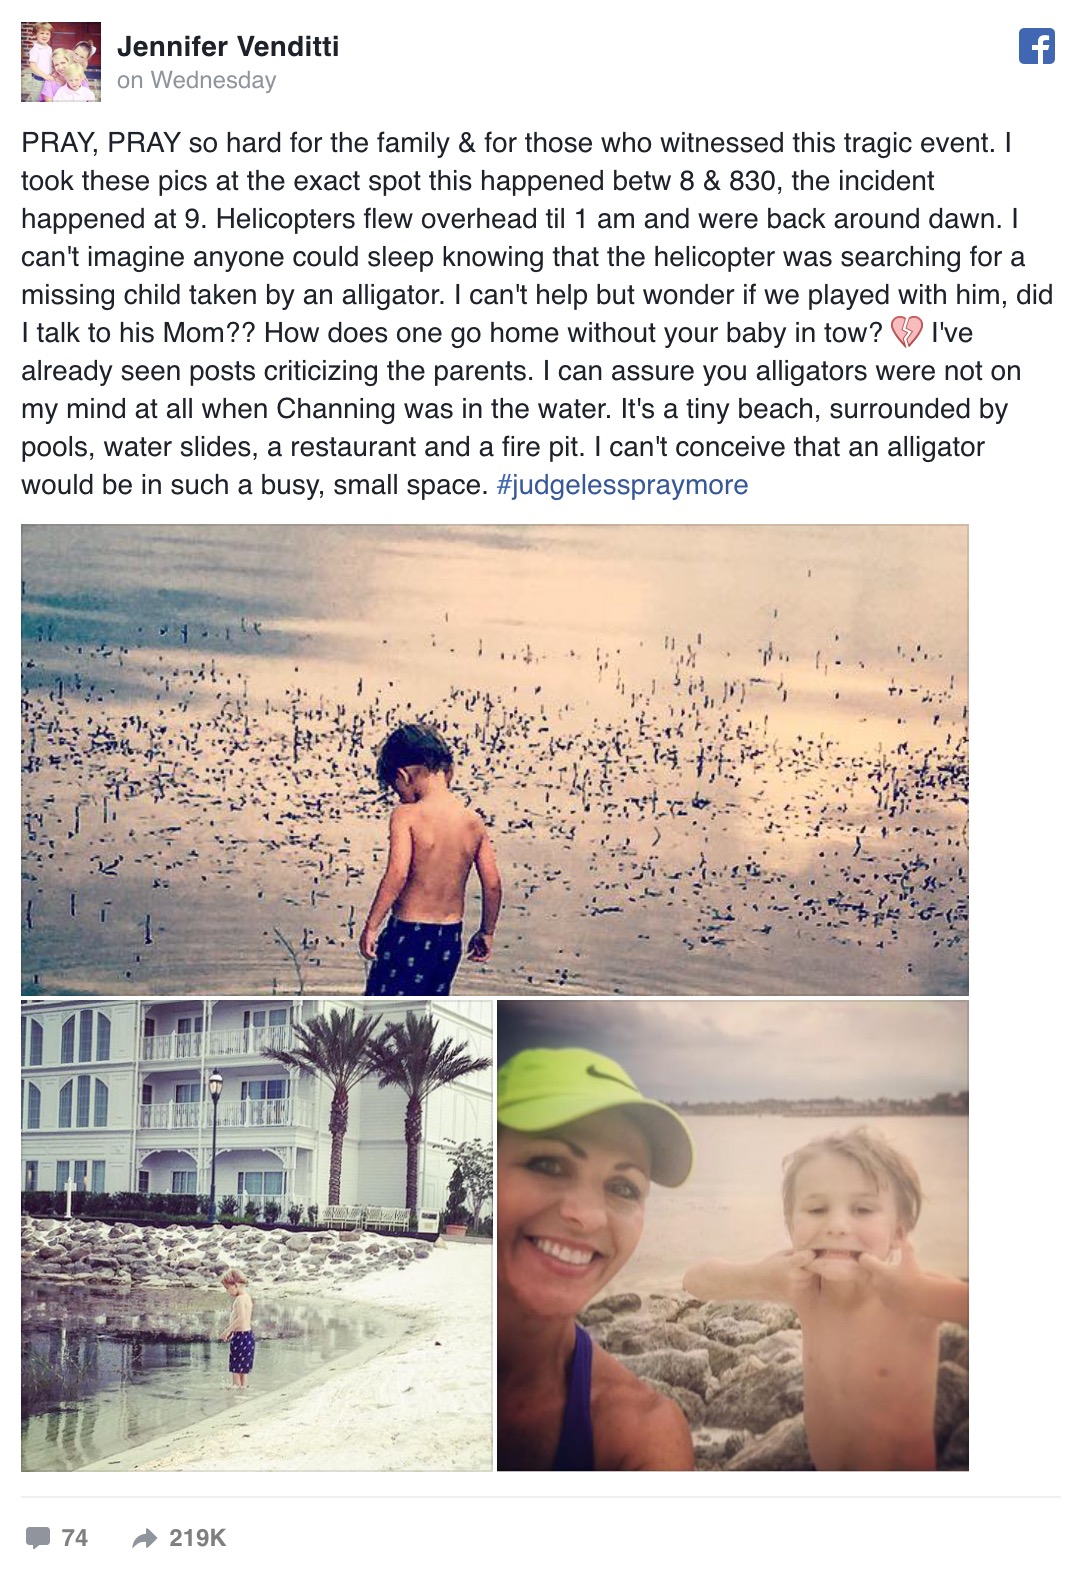 Photo of boy playing in the water hours before alligator attack